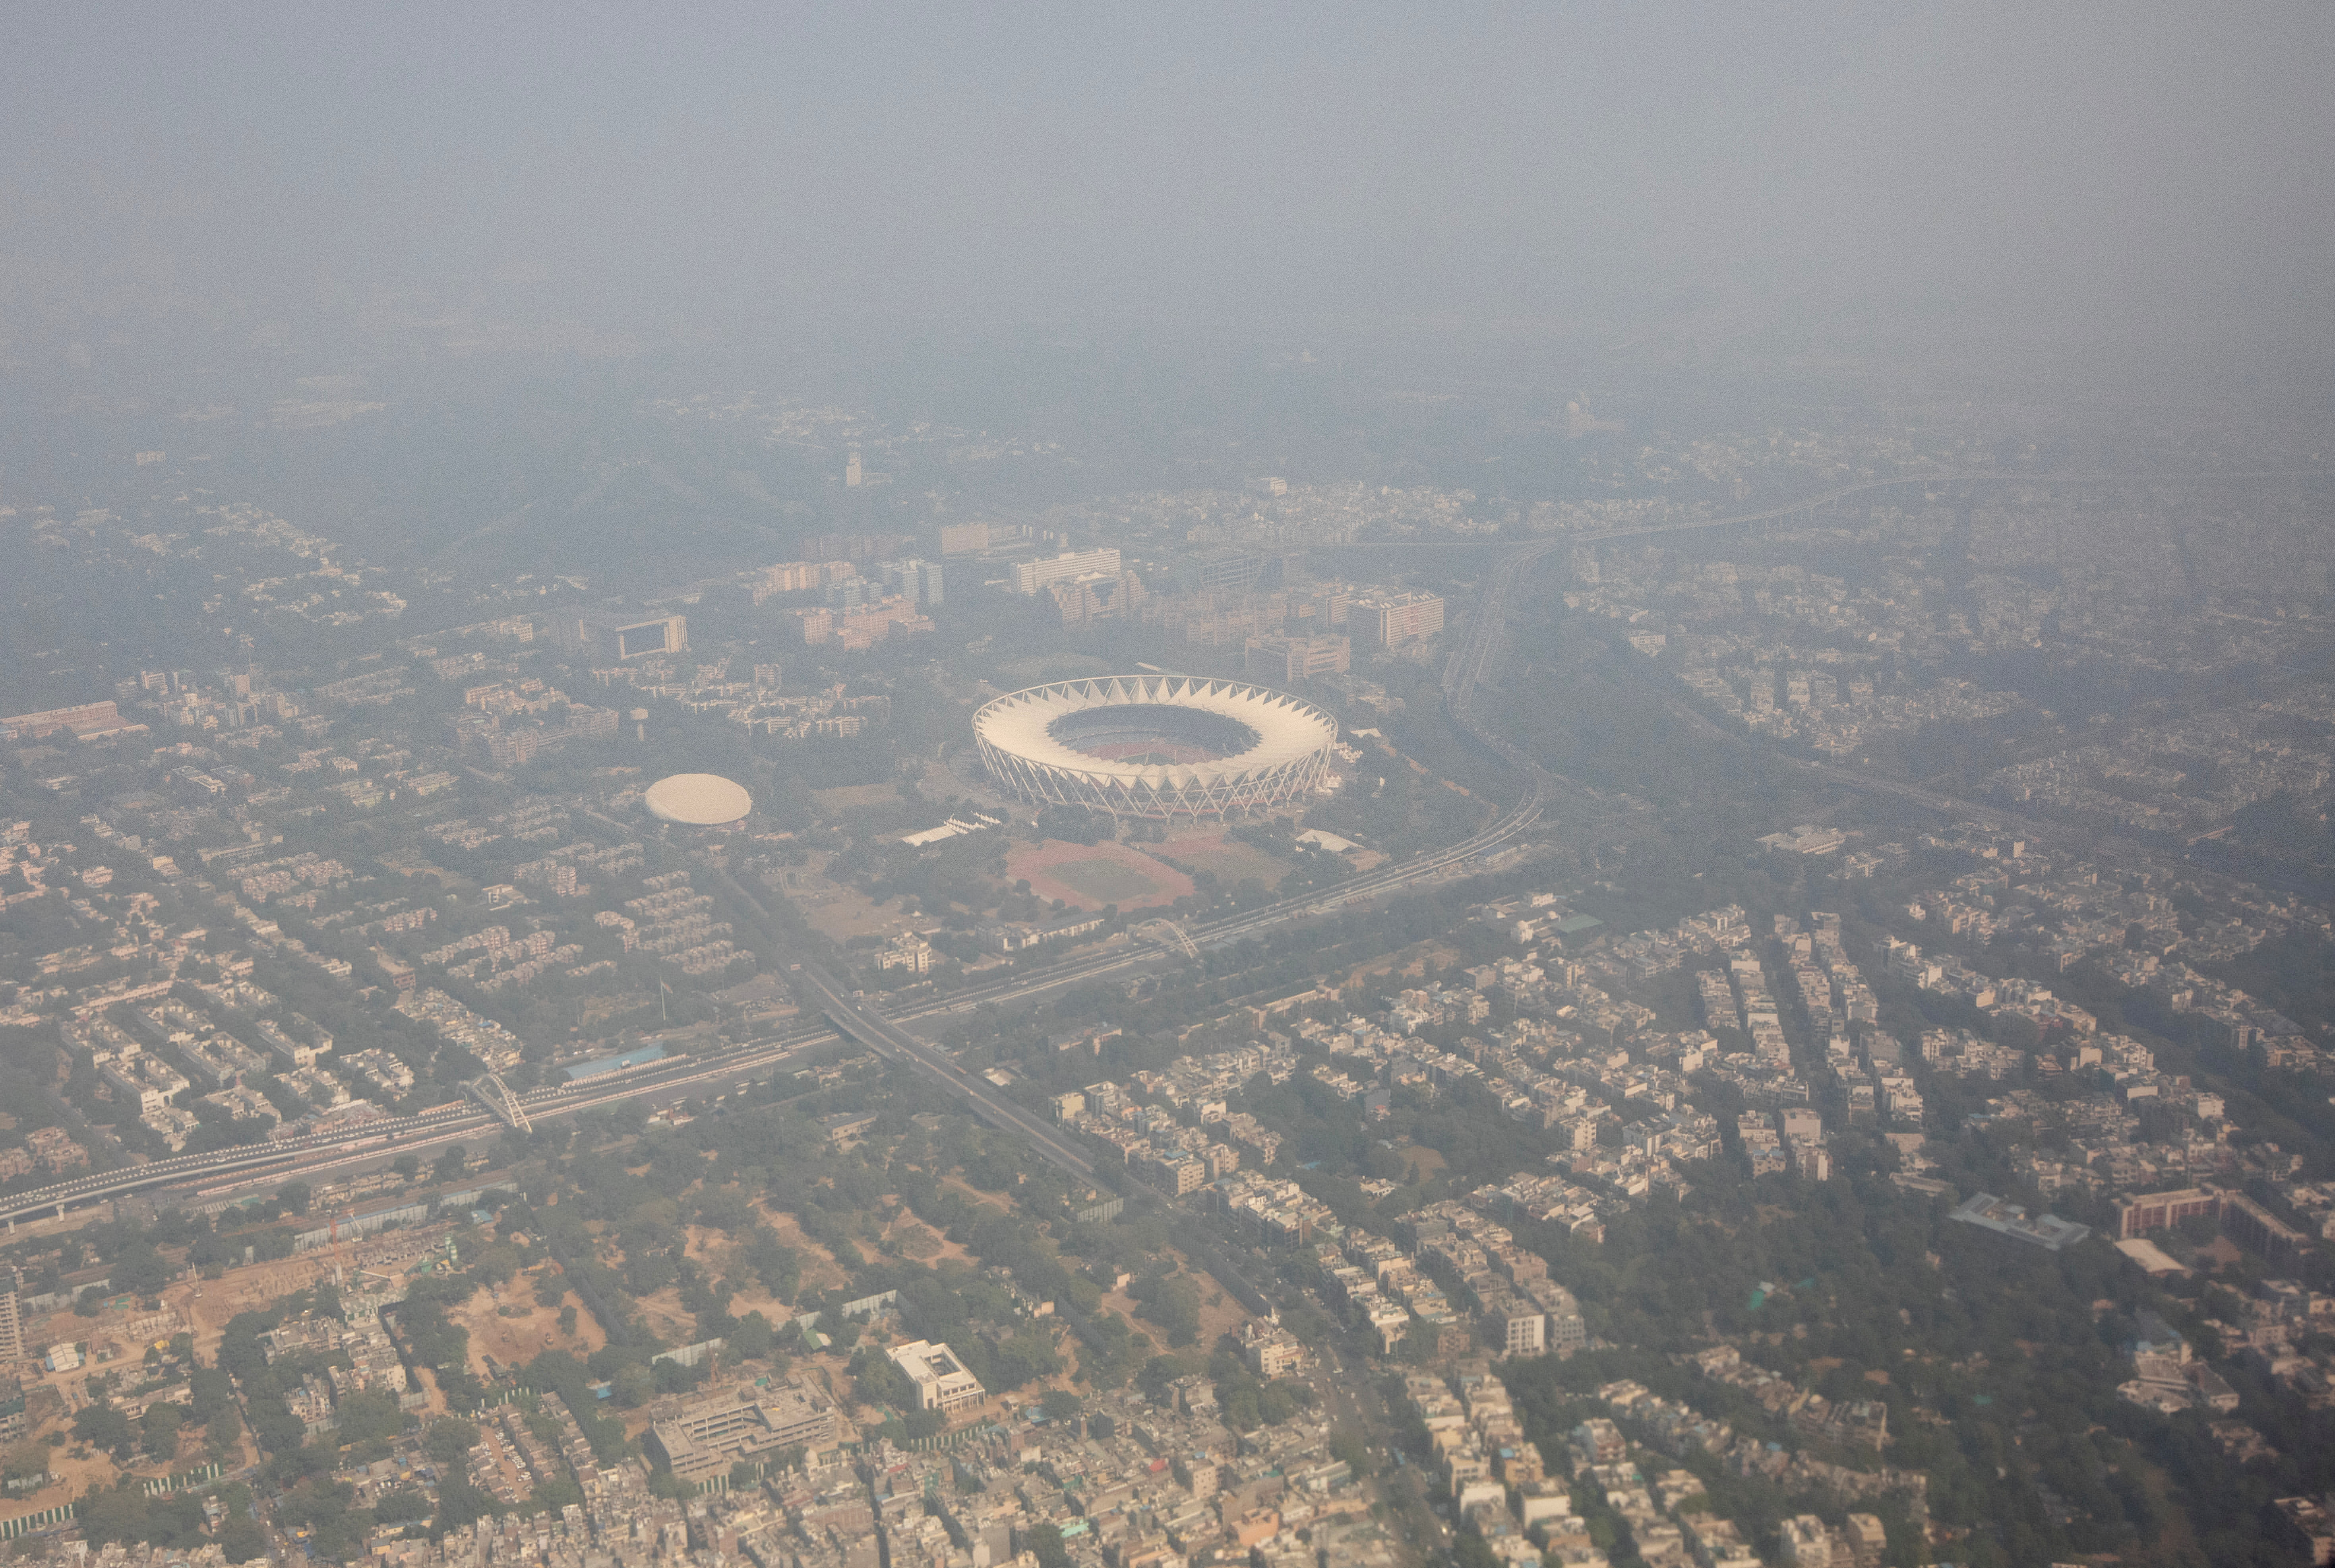 An aerial view shows residential buildings and a stadium shrouded in smog in New Delhi